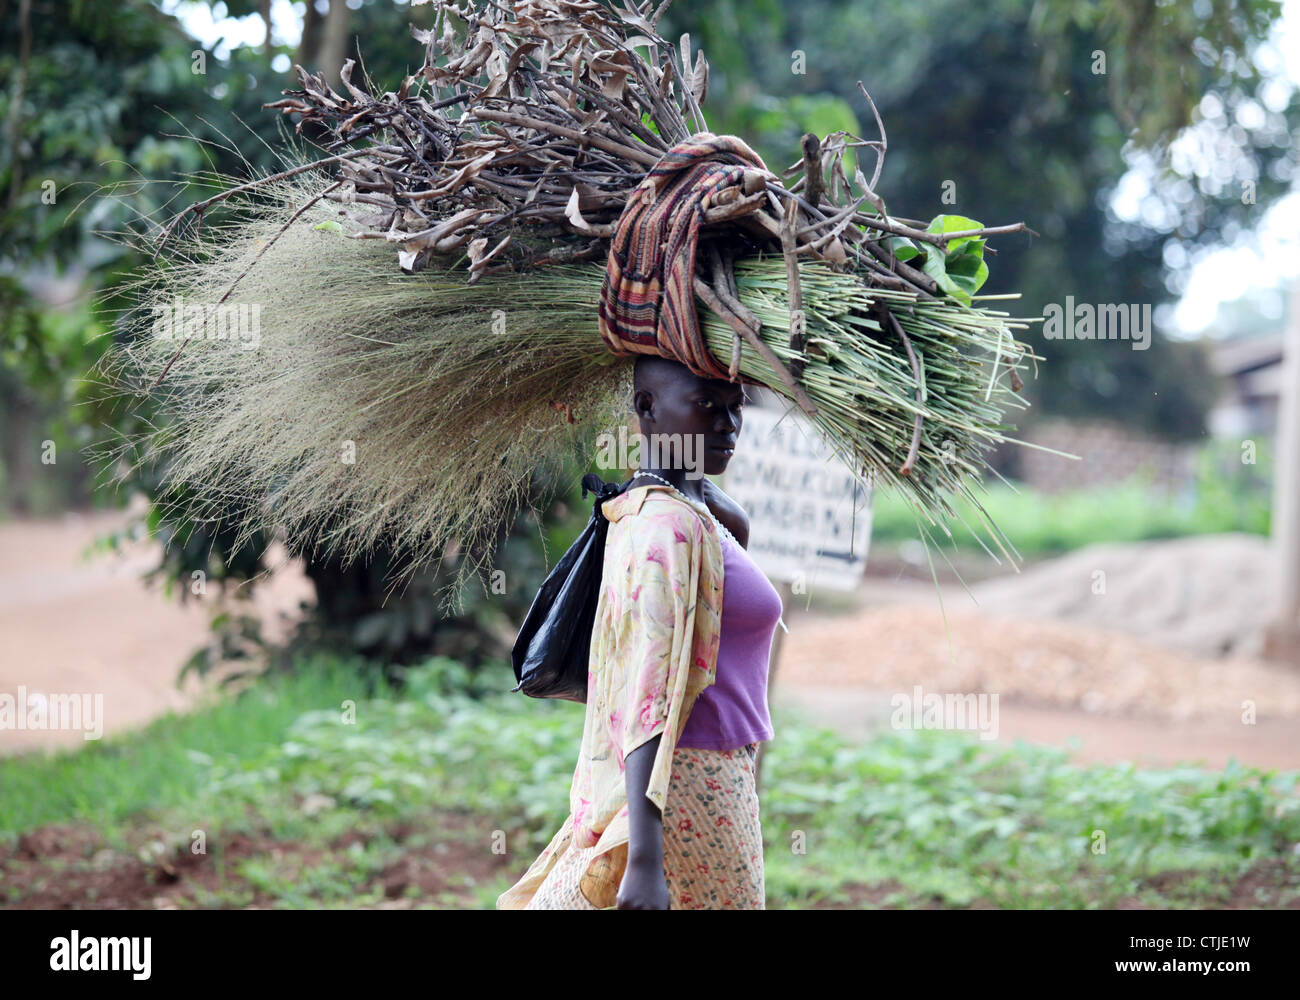 A woman carries wood and other materials through a village in the Luwero district of Uganda. Stock Photo